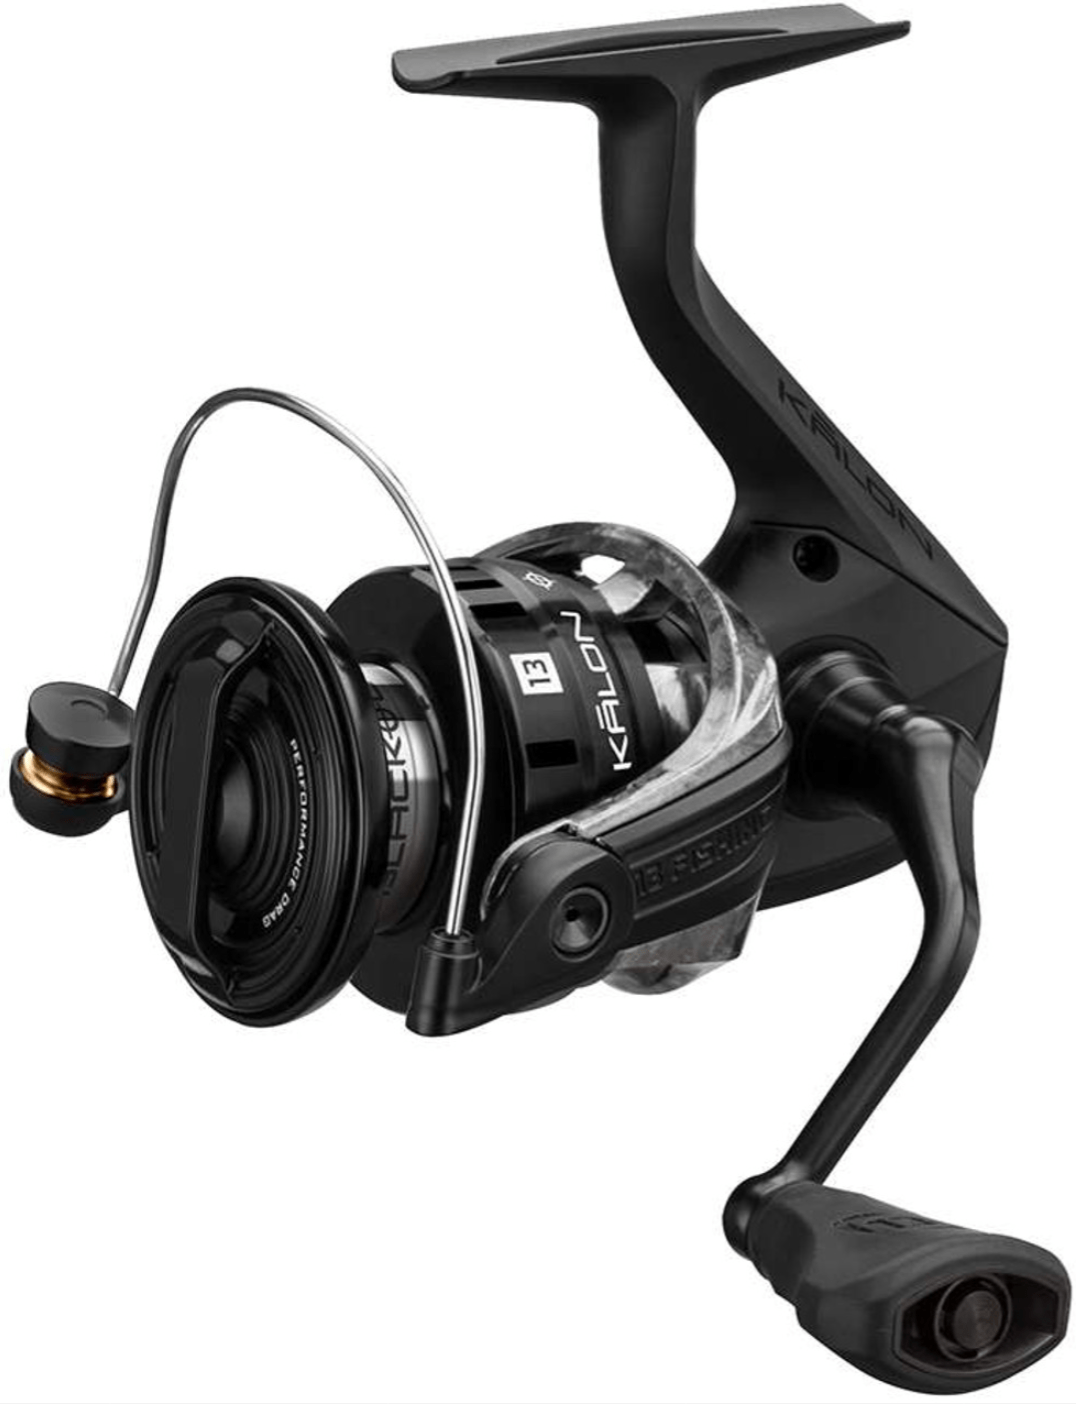 Tailored Tackle Fishing Rods Reels, Multispecies India